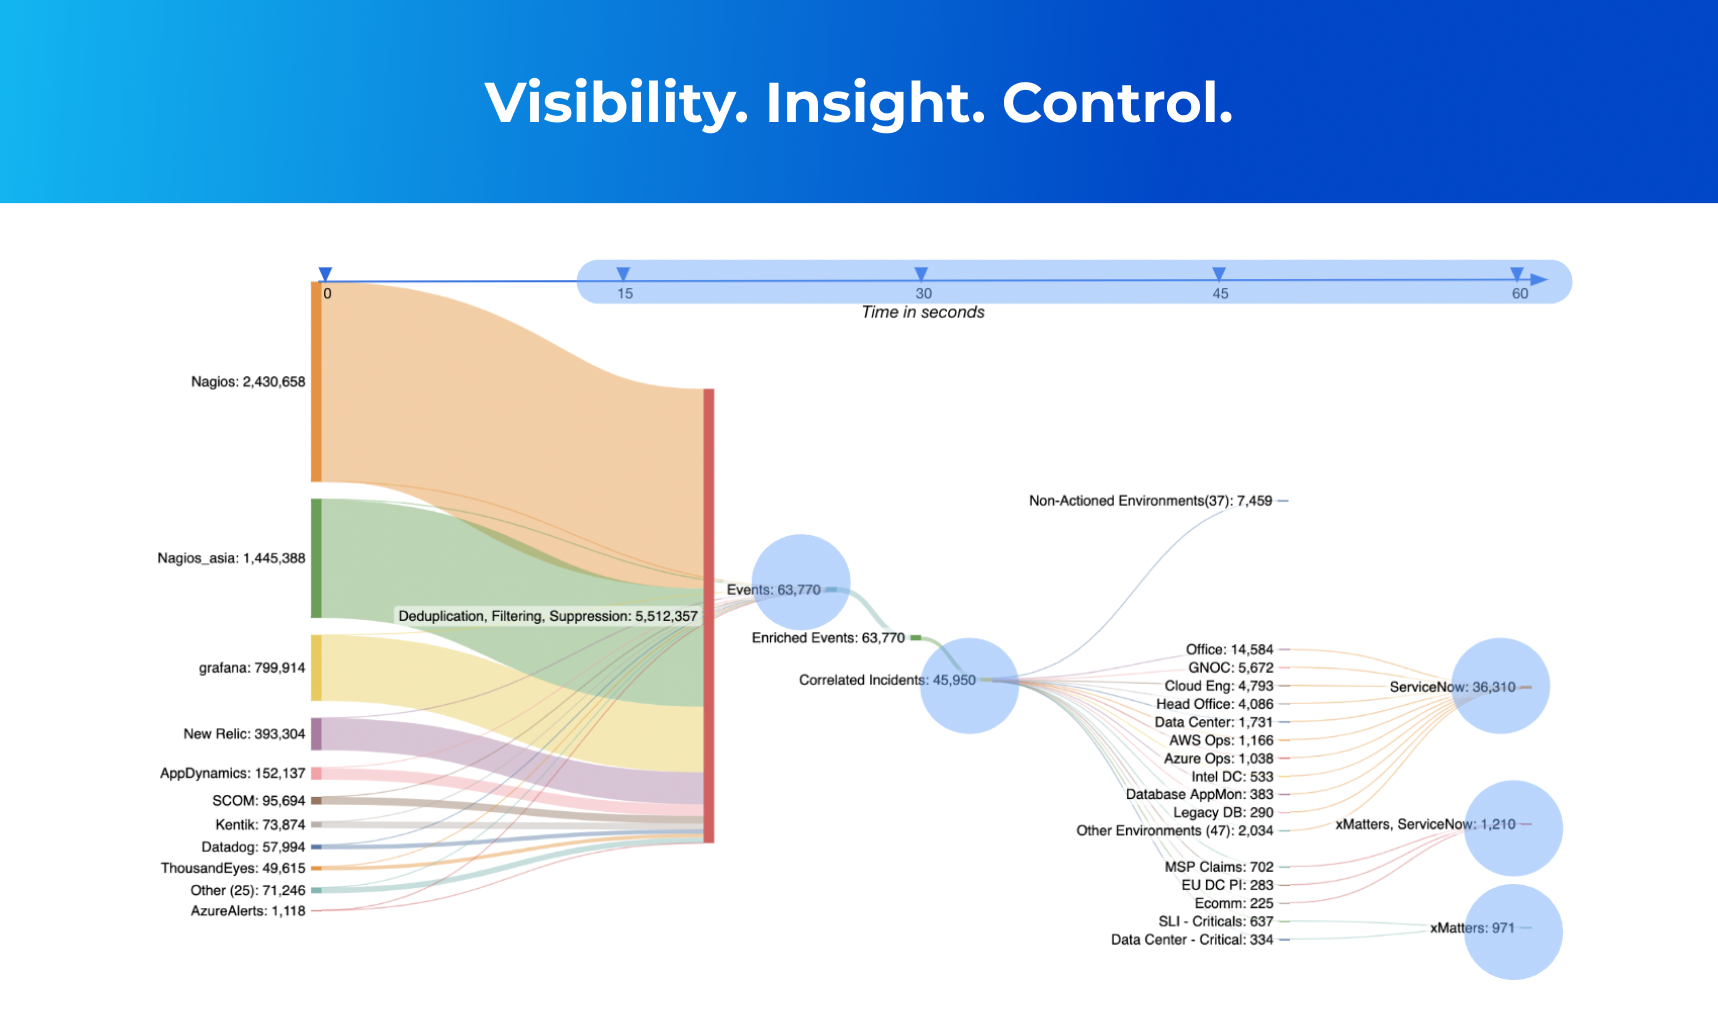 Visibility. Insight. Control. graphic